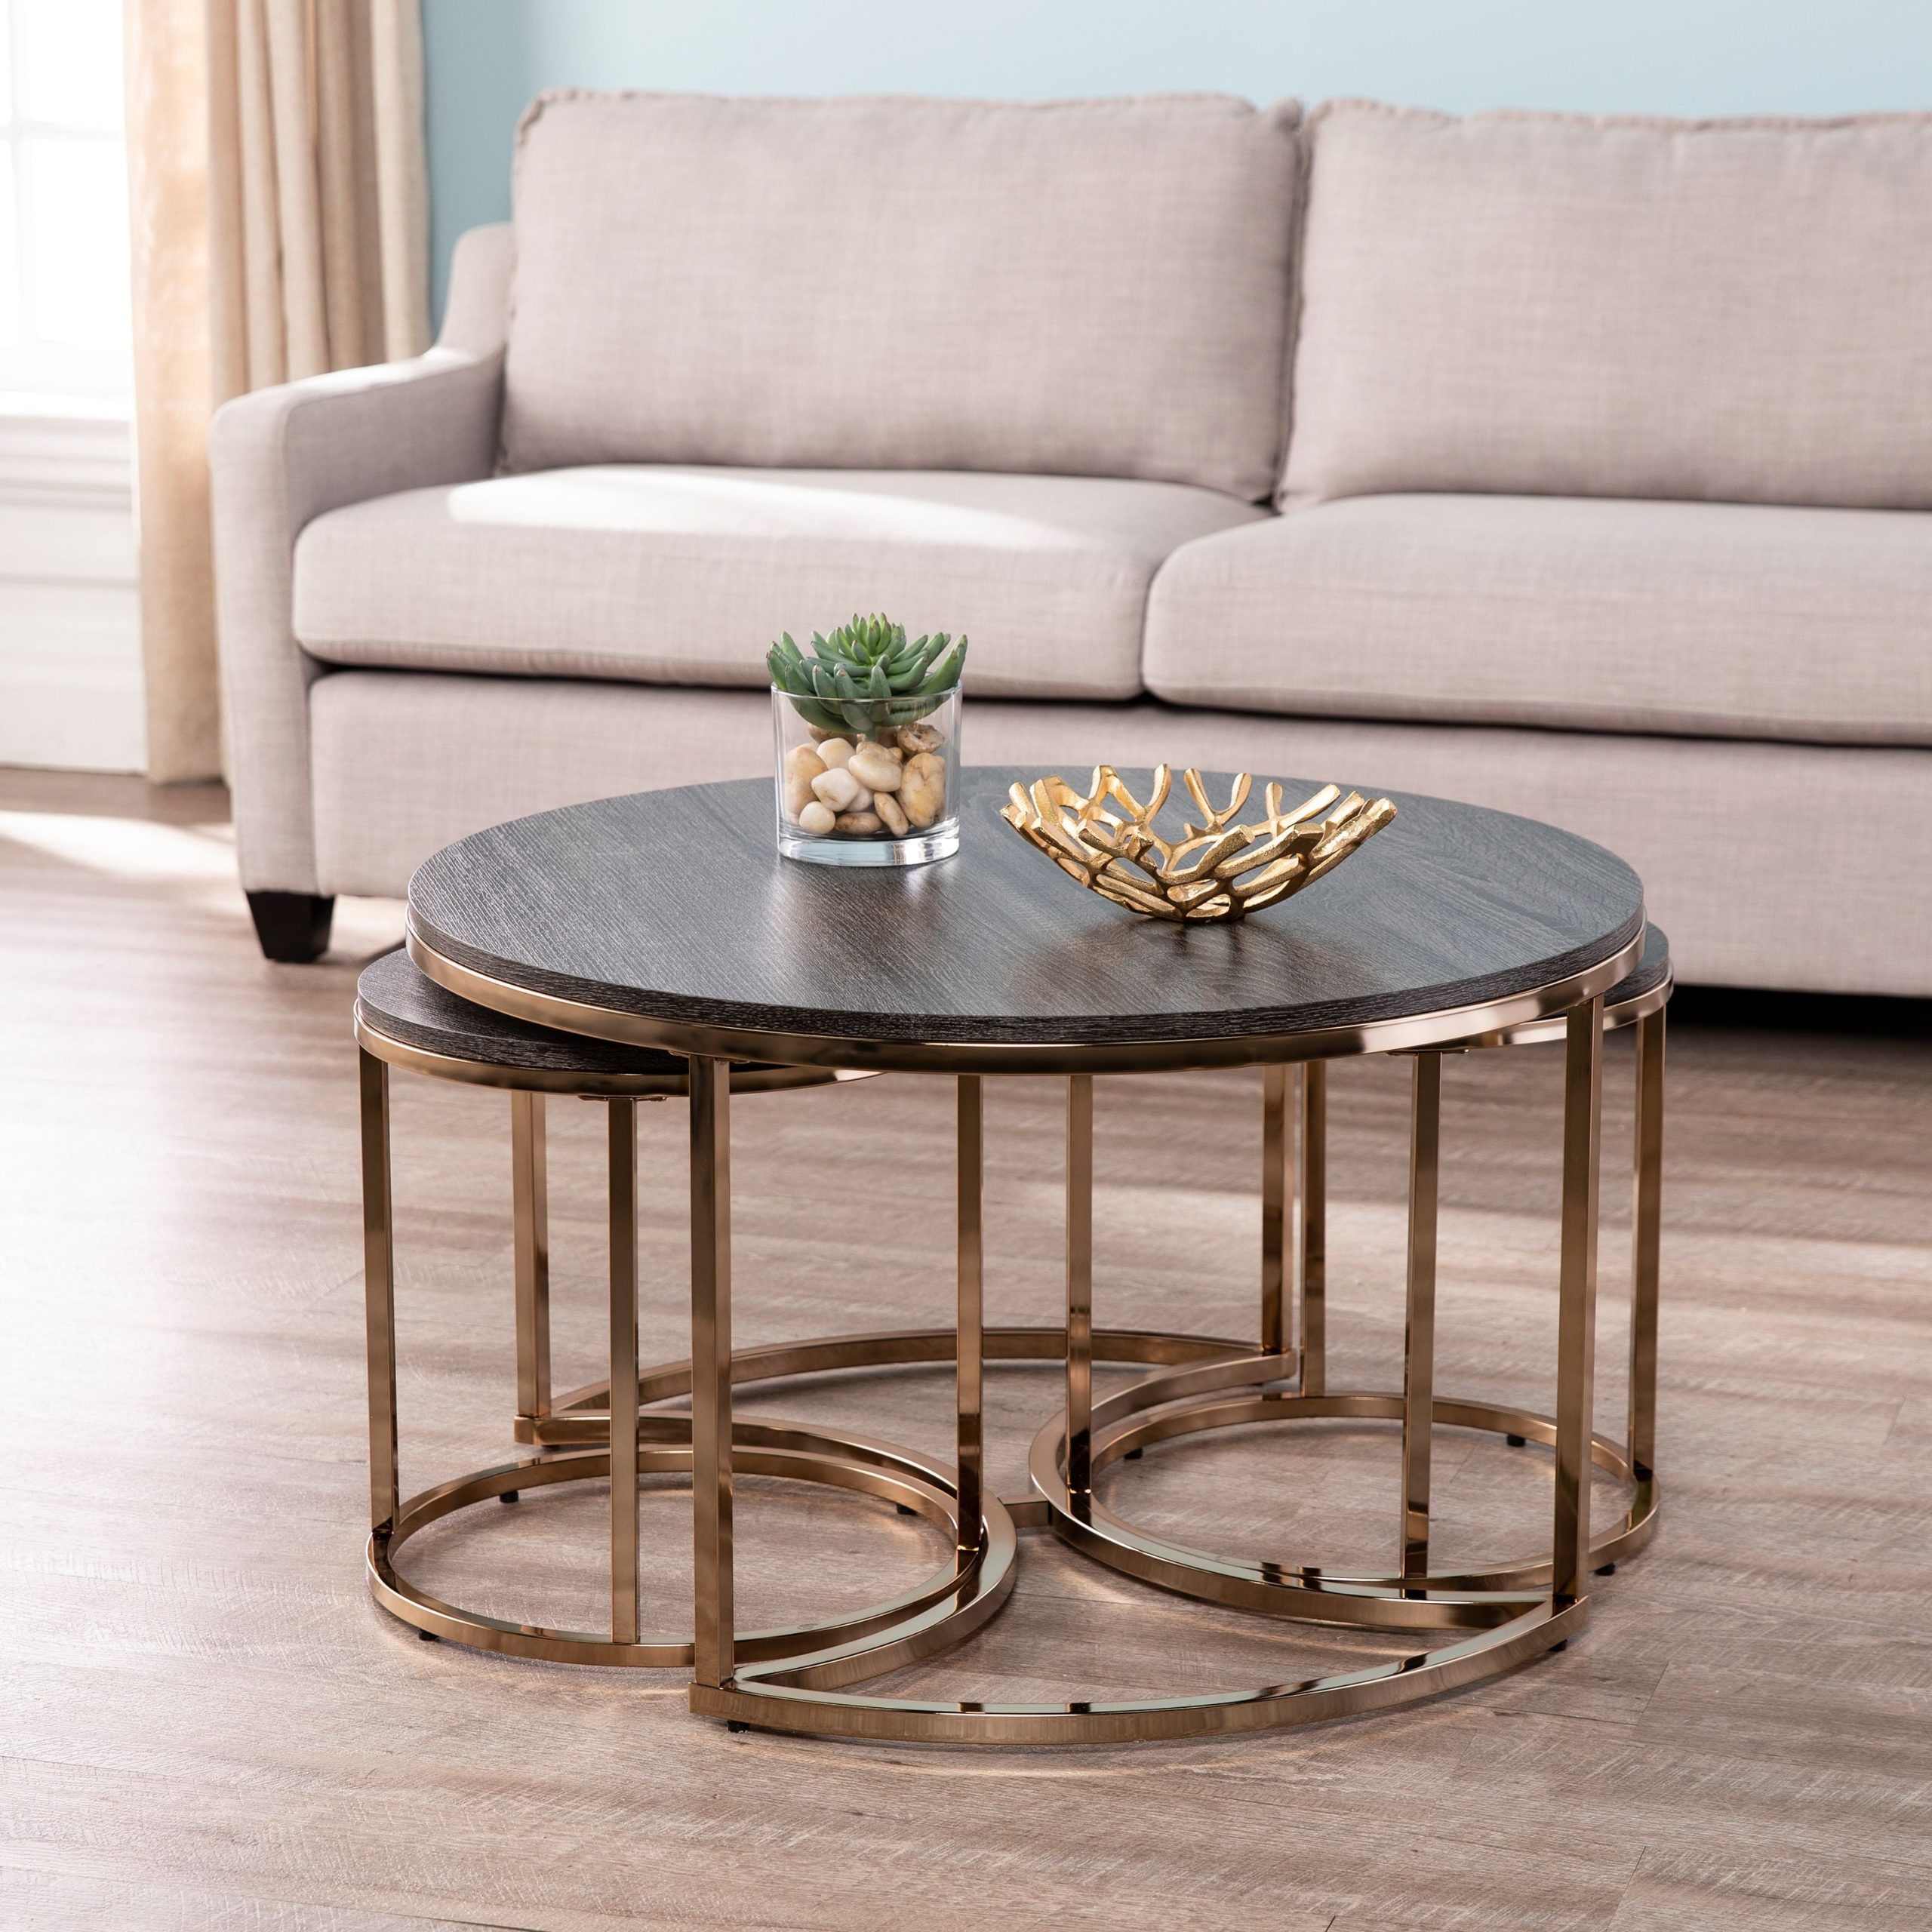 Ember Interiors Lokyle Metal And Wood Round Nesting Coffee Table, 3 Regarding Nesting Coffee Tables (Gallery 2 of 20)